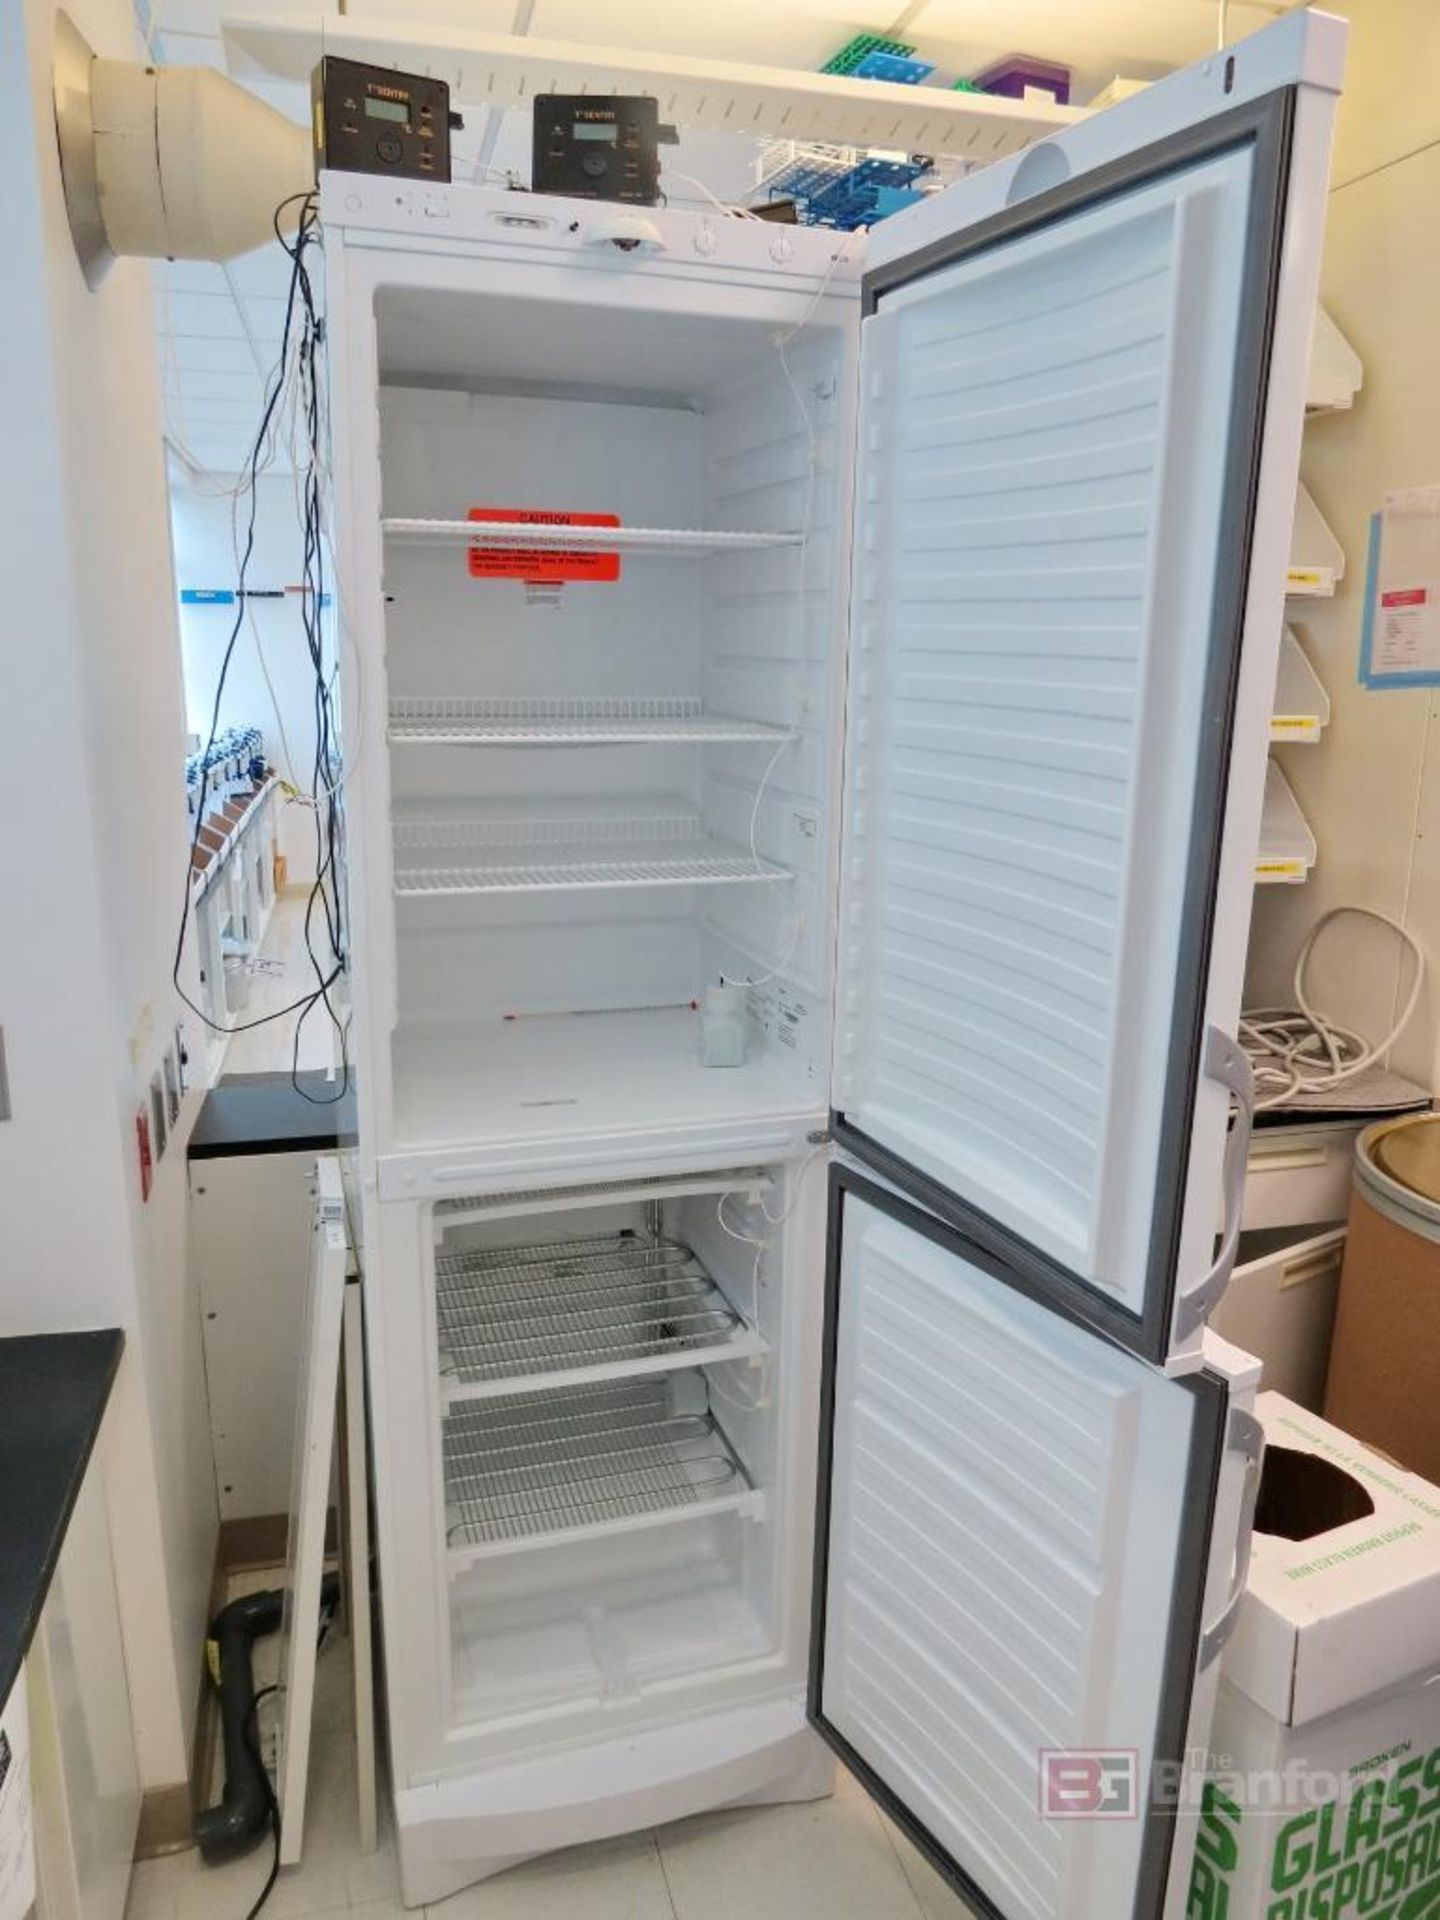 Thermo 12LCEETSA Double Stack Refrigerator - Image 2 of 5